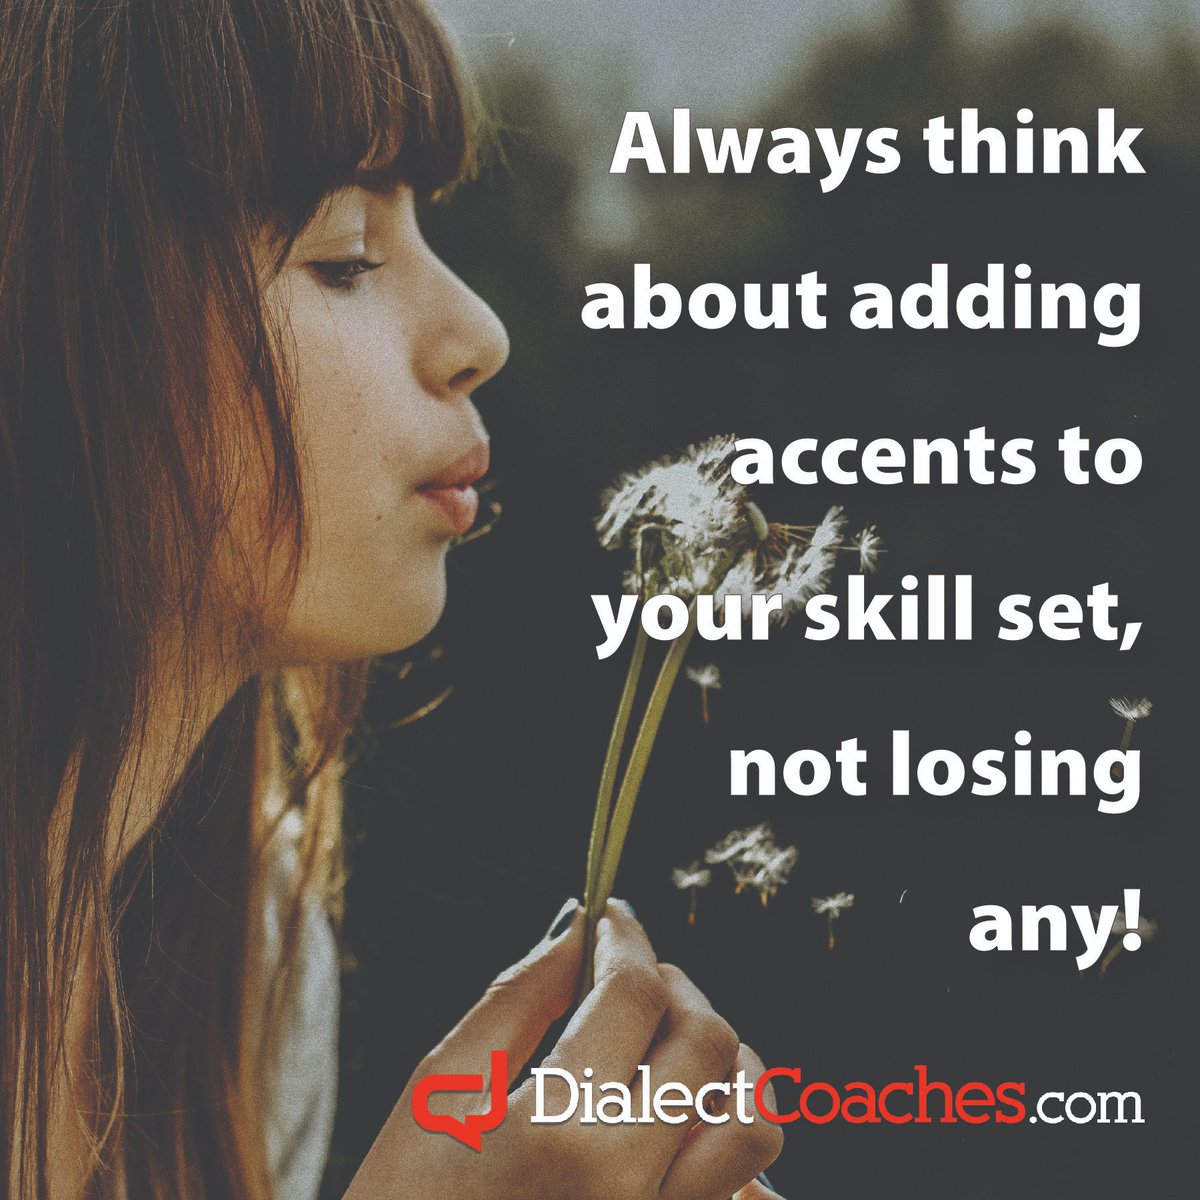 It's easy to fall into the trap of thinking you should 'lose' your accent, but your accent is part of you AND it's a skill that you can use in your acting career. Always think about adding accents to your skill set, not losing any! #loveyouraccent #accentisidentity #acting